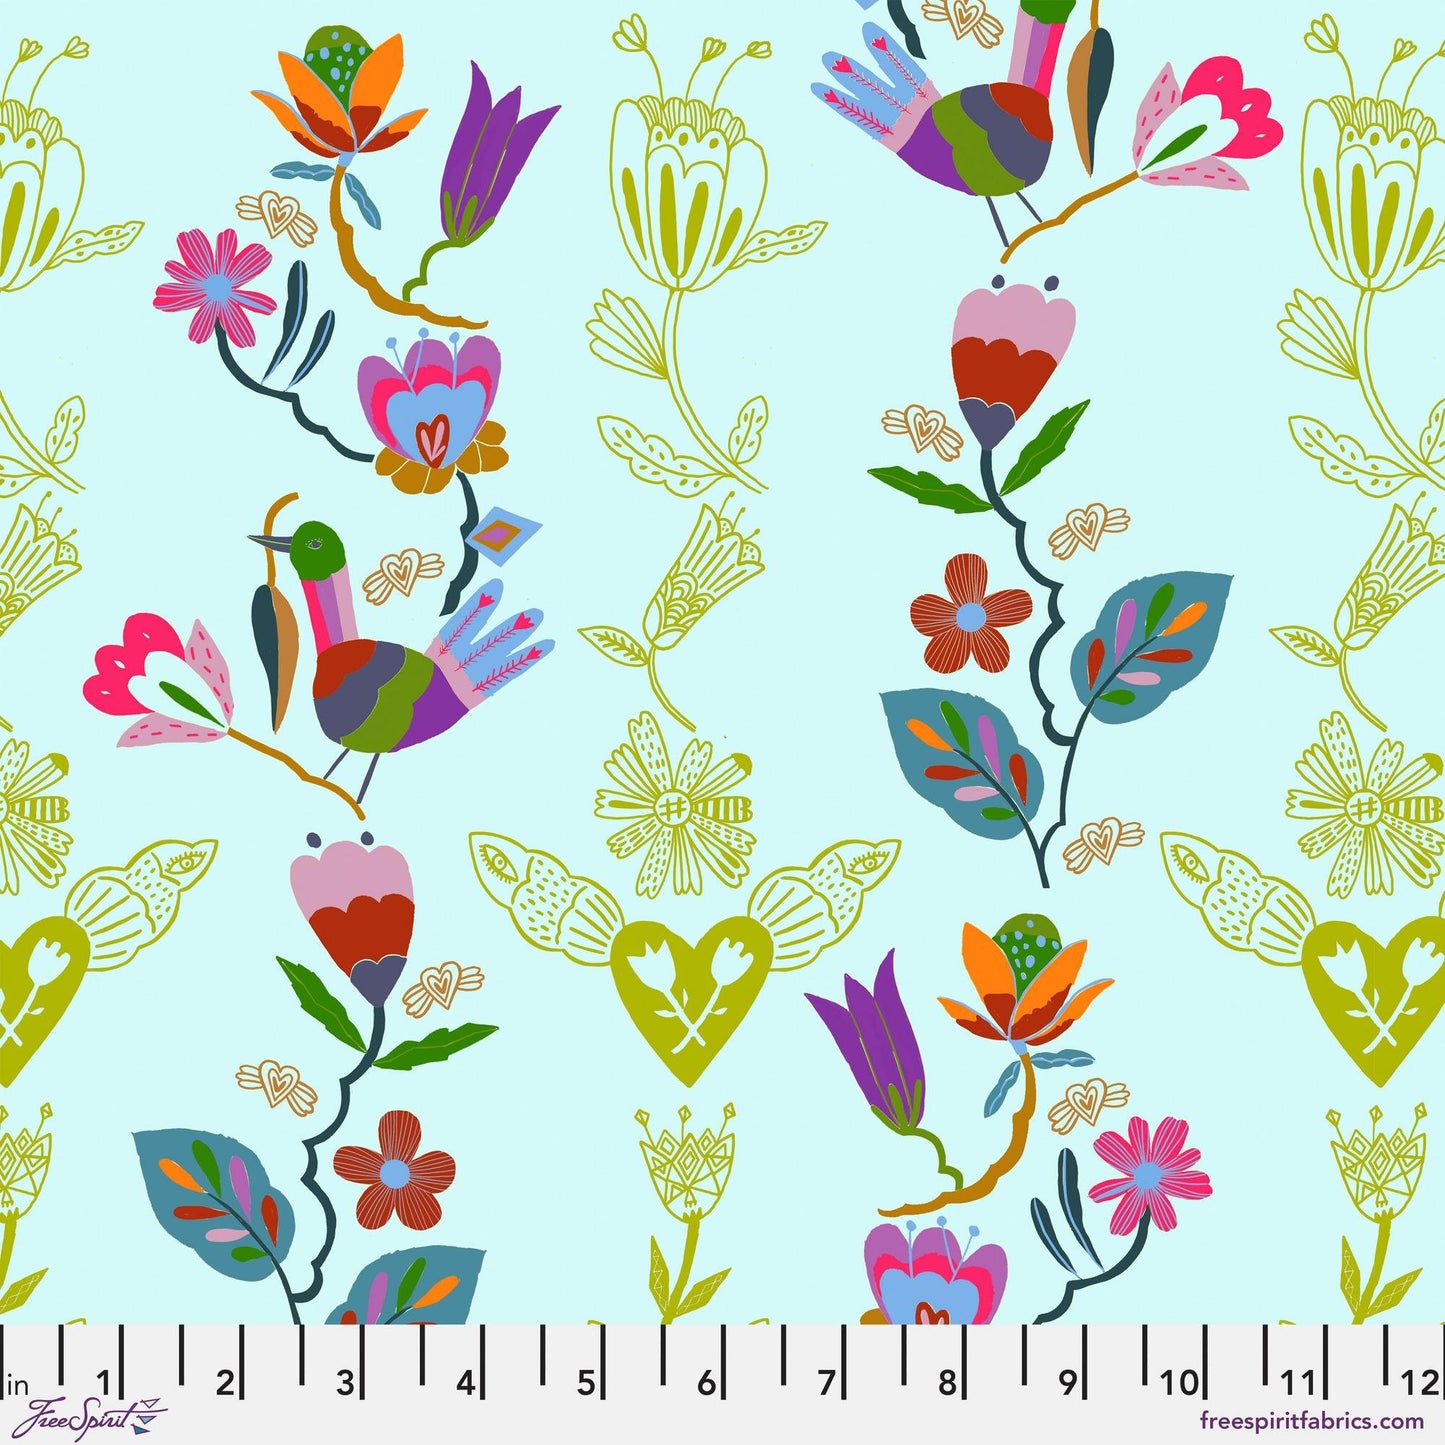 Clever Climbers Keylime Harmony Carolyn Gavin for Conservatory Craft Freespirit Fabric Quilters Cotton Fabric Fetish